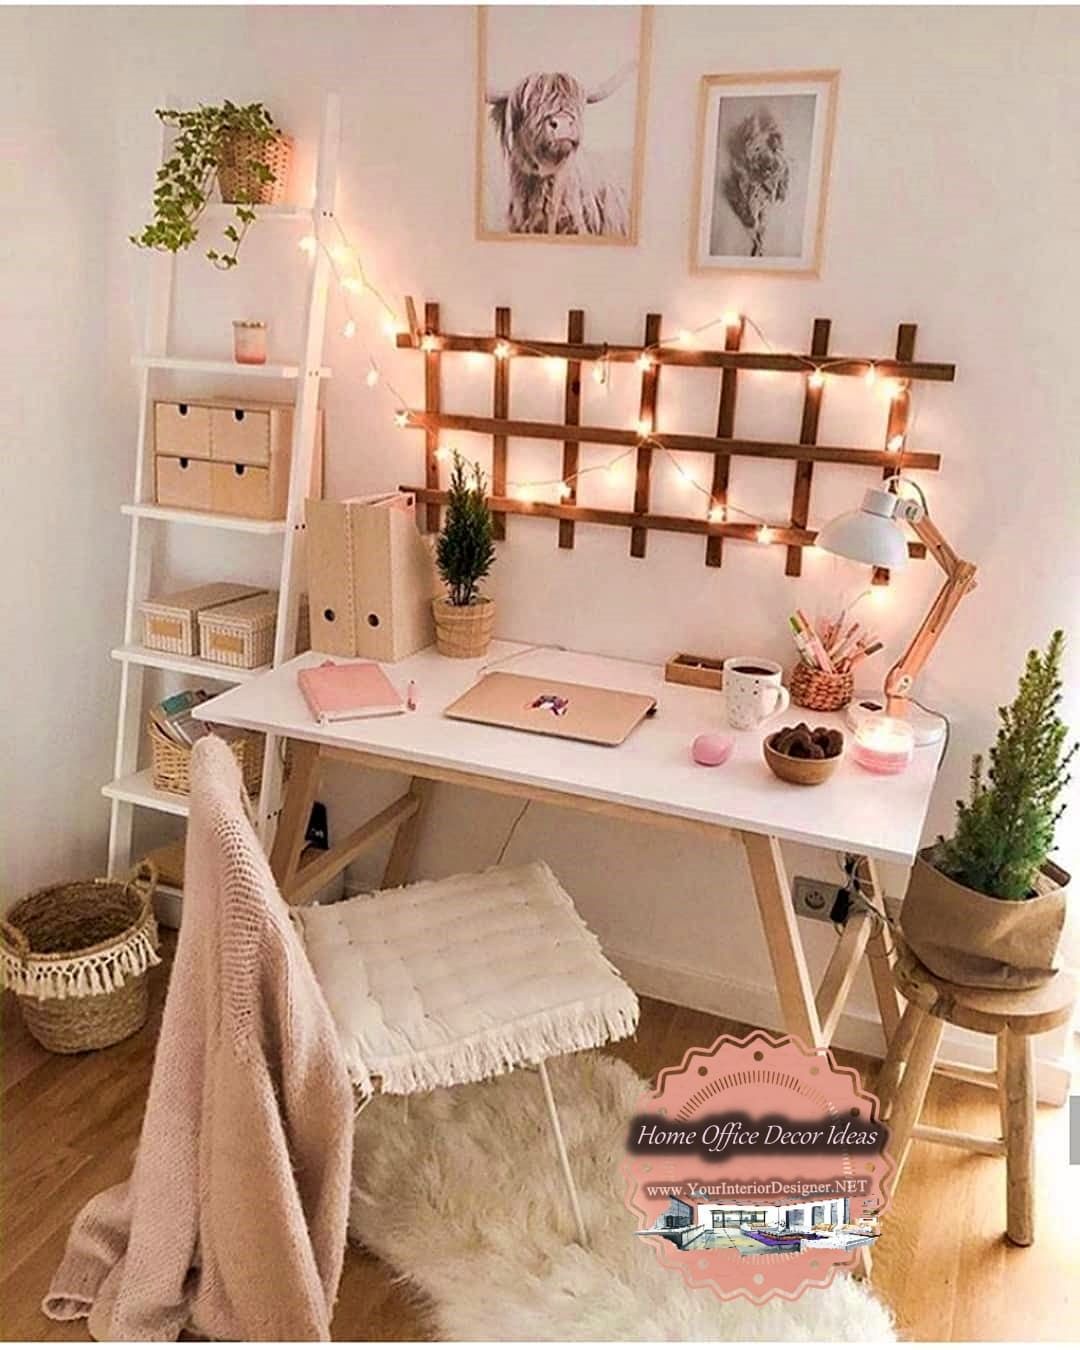 66 Unique Decor and Design Ideas For Home Office Workers / Advice Page: 12 -   18 room decor Simple ideas